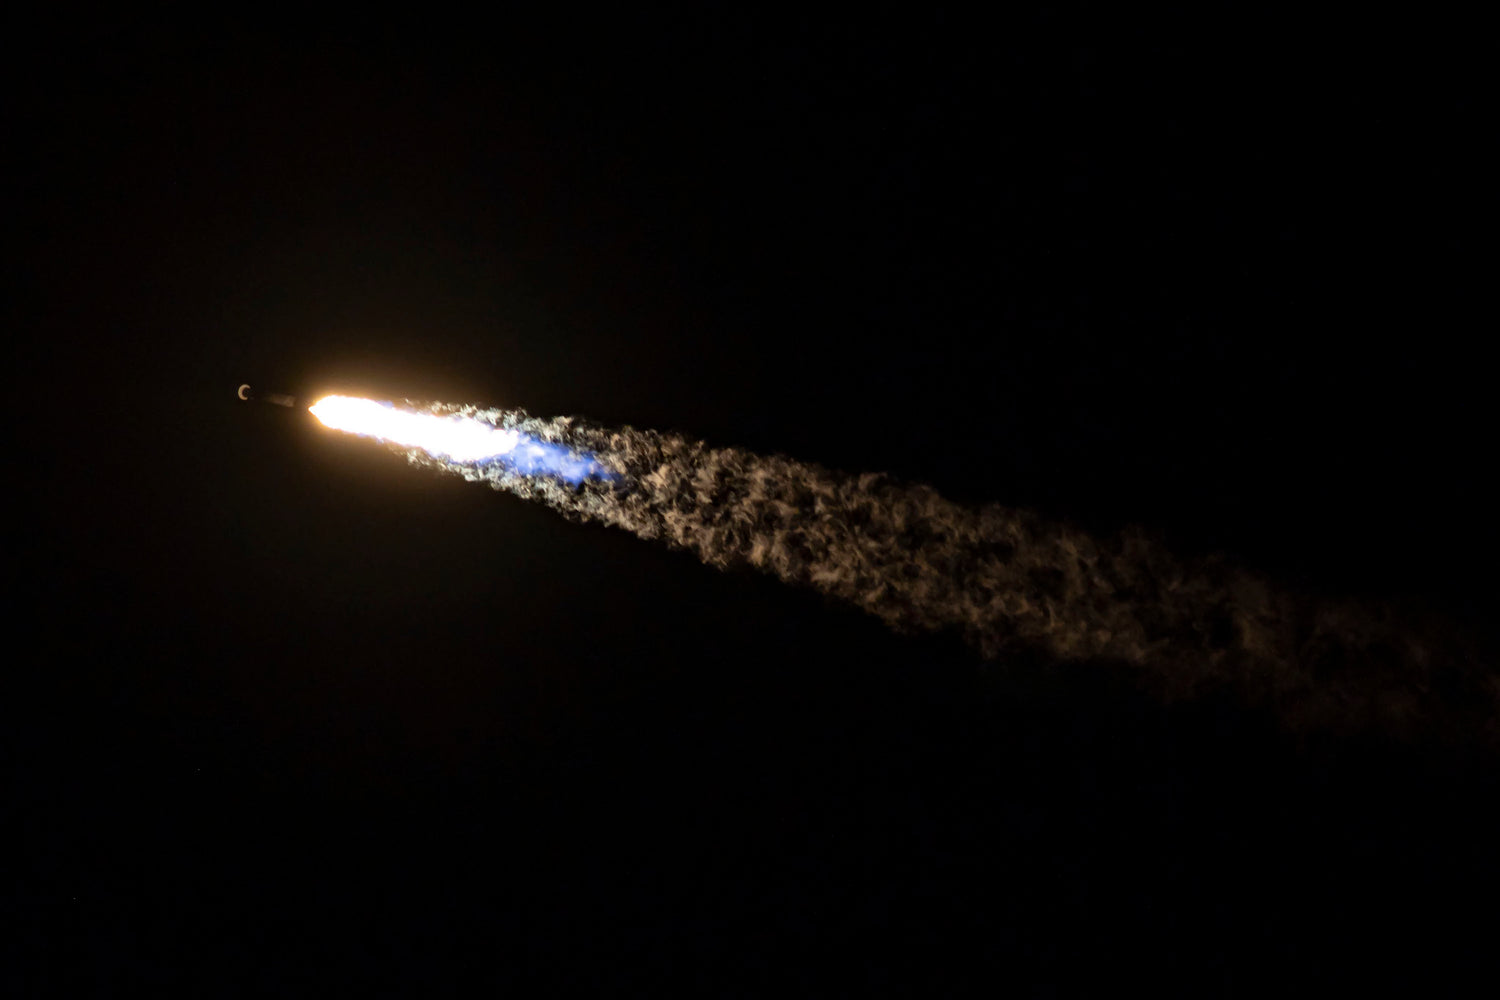 SpaceX's Previously Flown Falcon 9 Conducts Record-Breaking 10th Flight During Starlink Mission